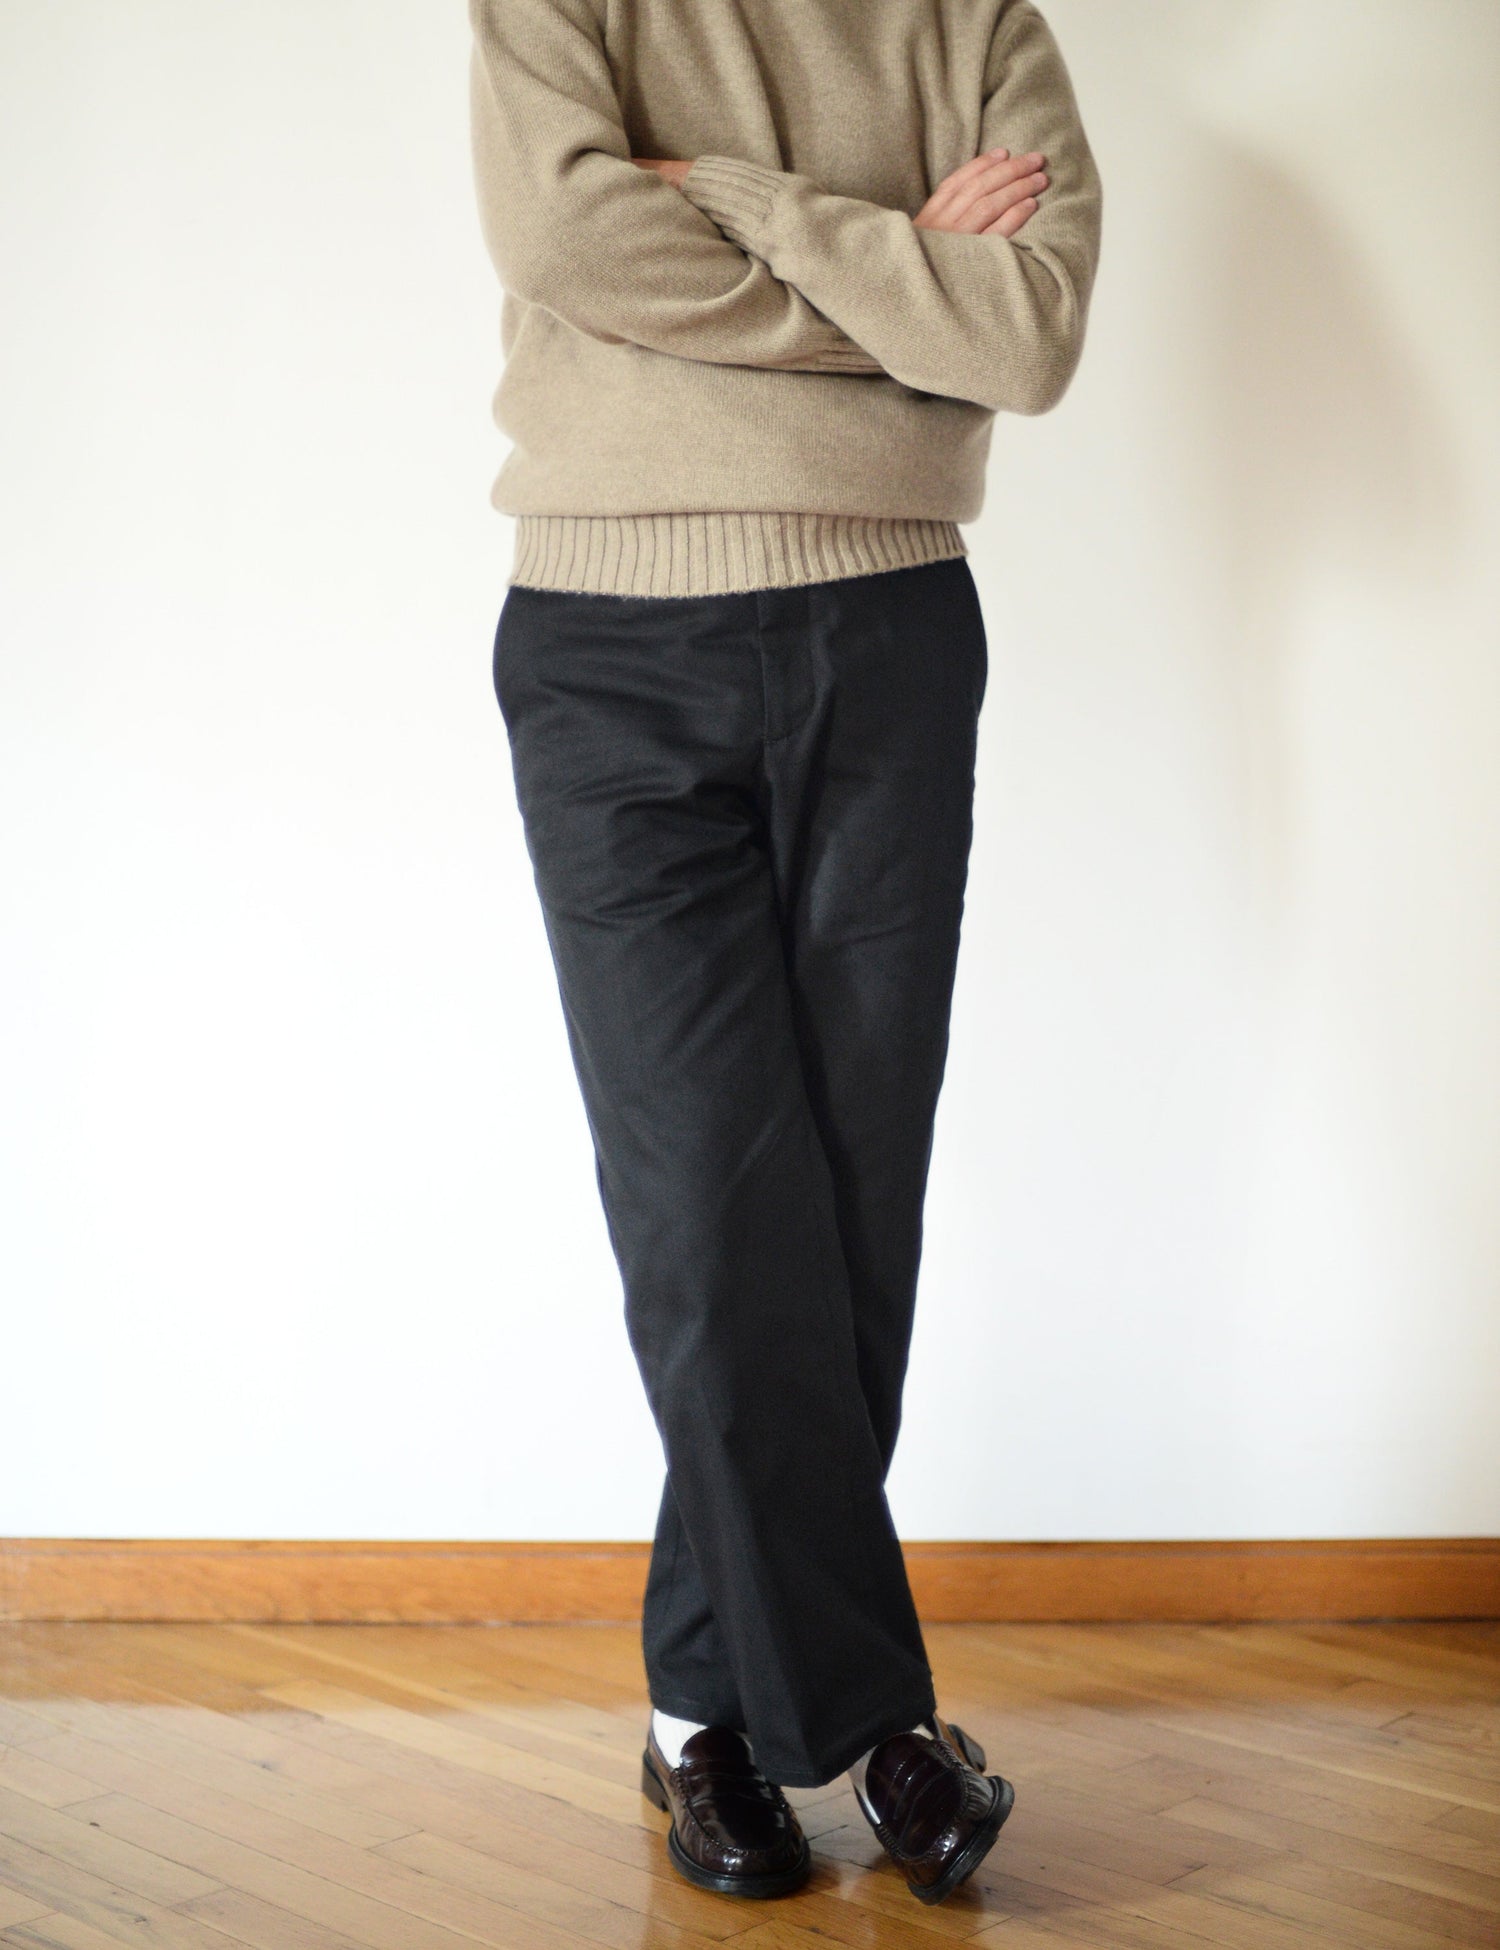 Brooklyn Tailors BKT36 Straight Leg Pant in Cotton Cavalry Twill - Black on-body shot. Model is wearing the pants with a tan sweater, black loafers, and white socks